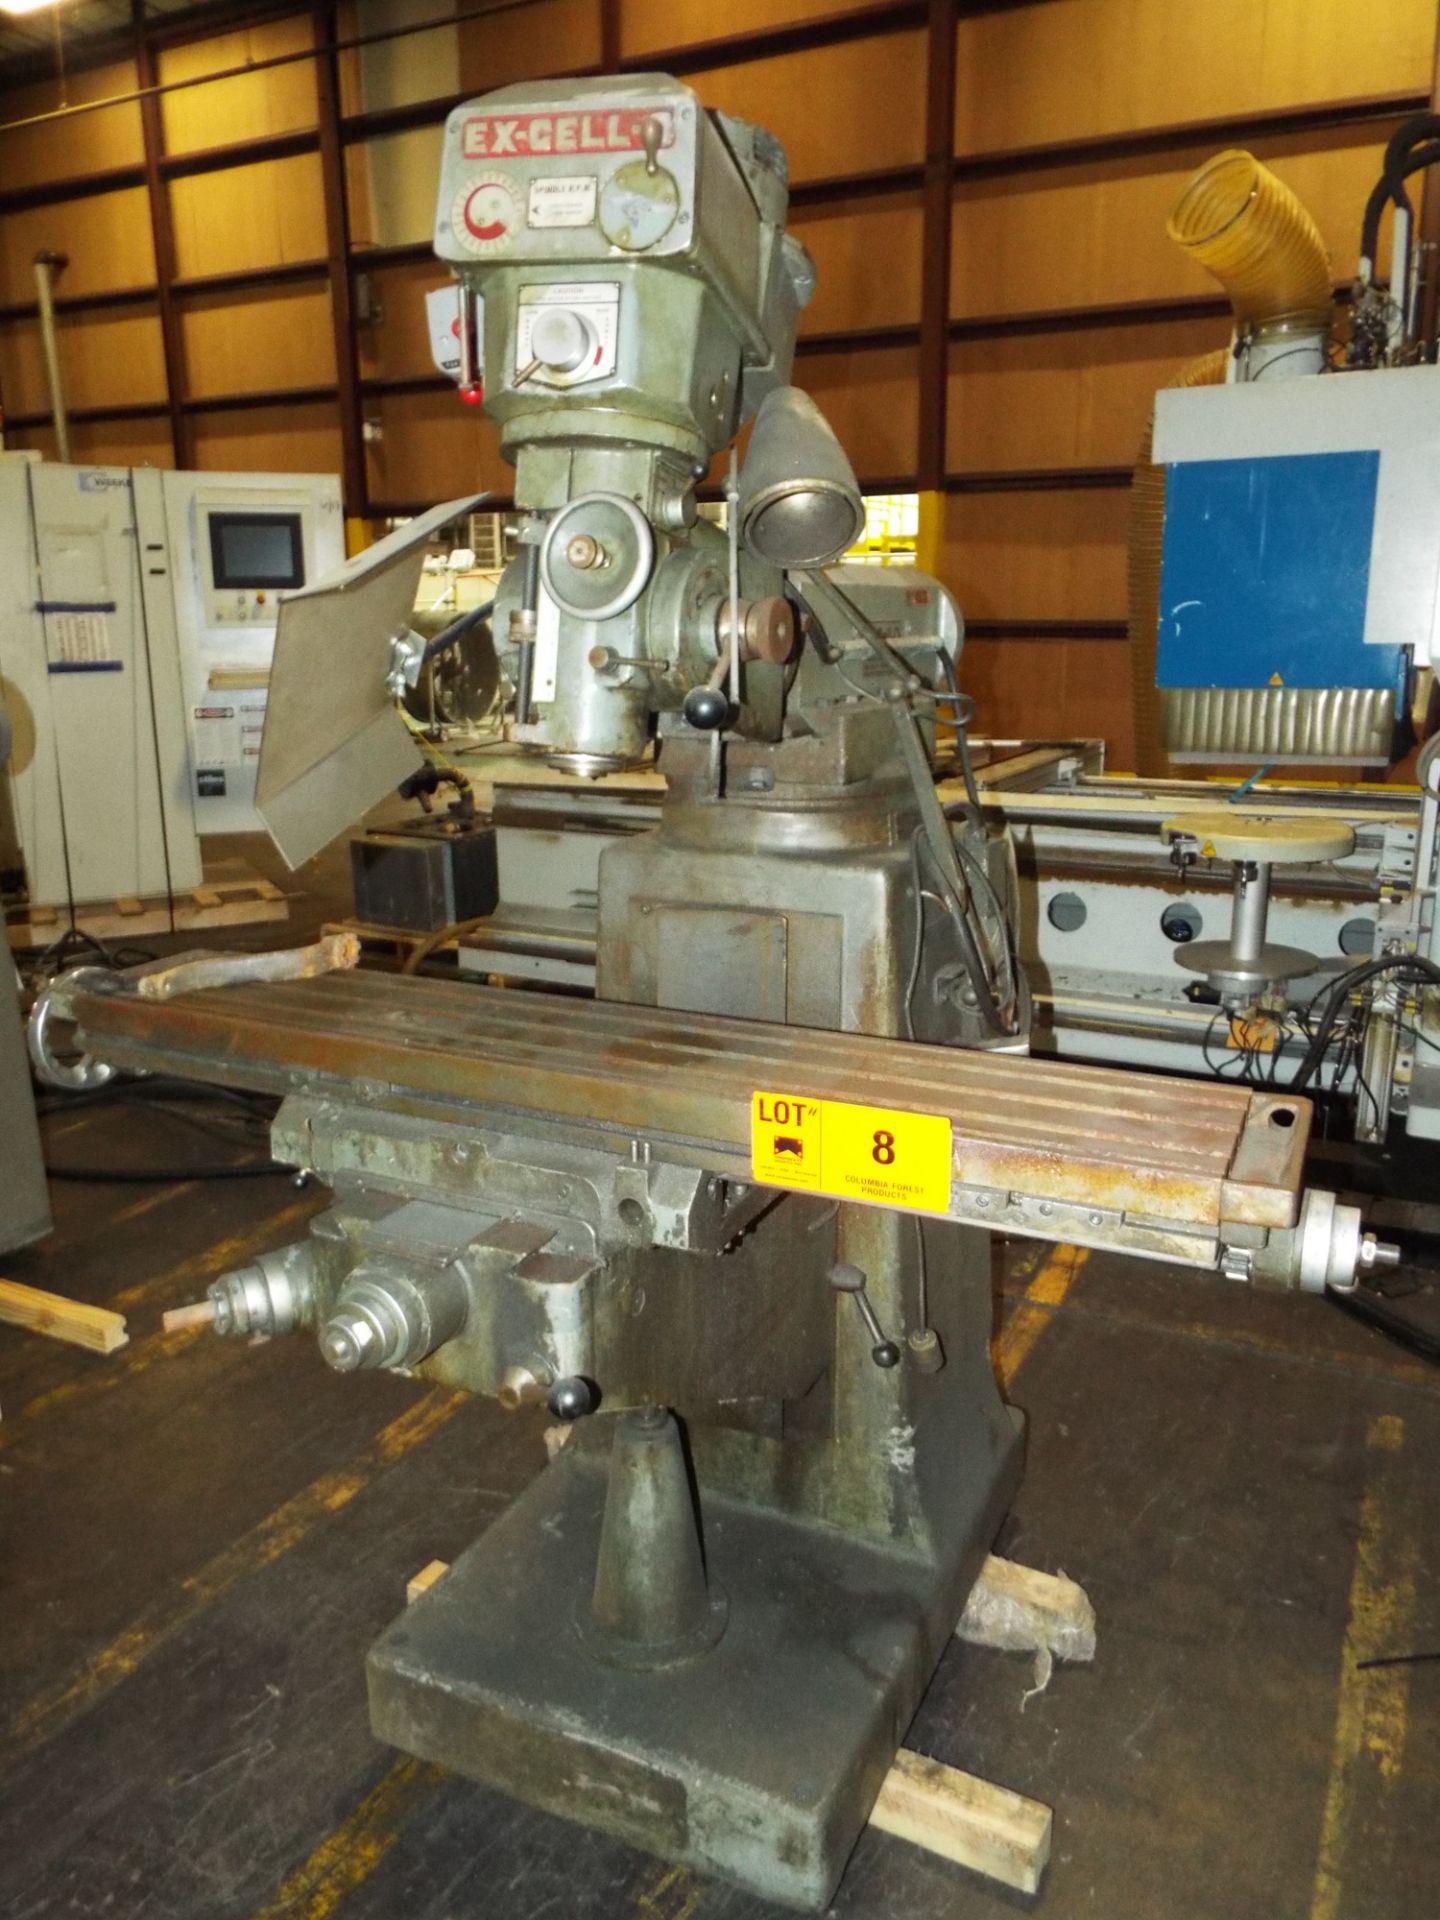 EX-CELL-O NO. 602 VERTICAL MILLING MACHINE WITH 9"X52" TABLE, SPEEDS TO 4000 RPM, 1.5 HP, S/N: - Image 2 of 5